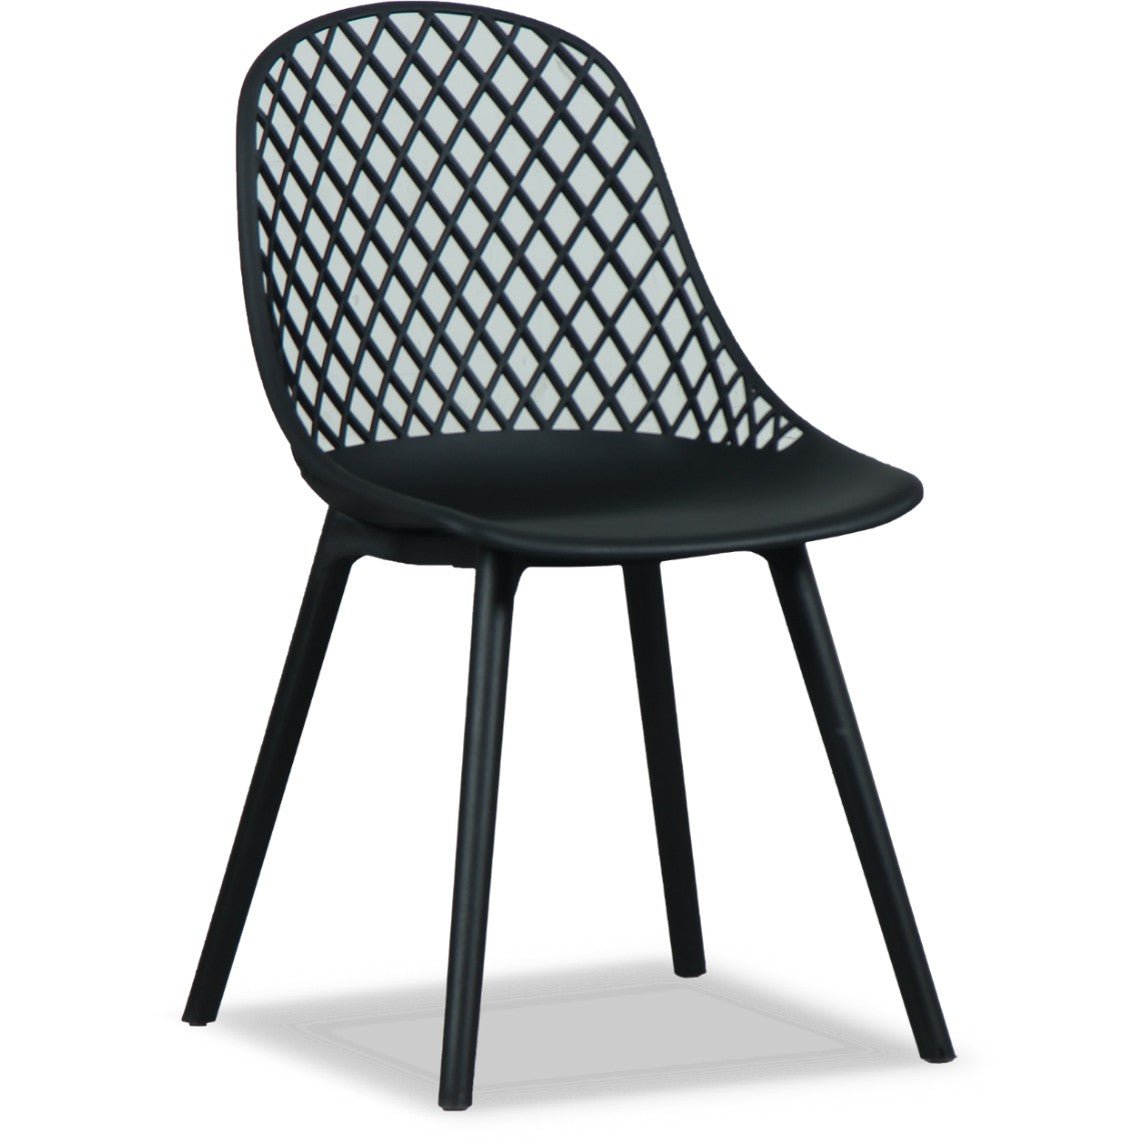 Roma Resin Outdoor Chair - Black